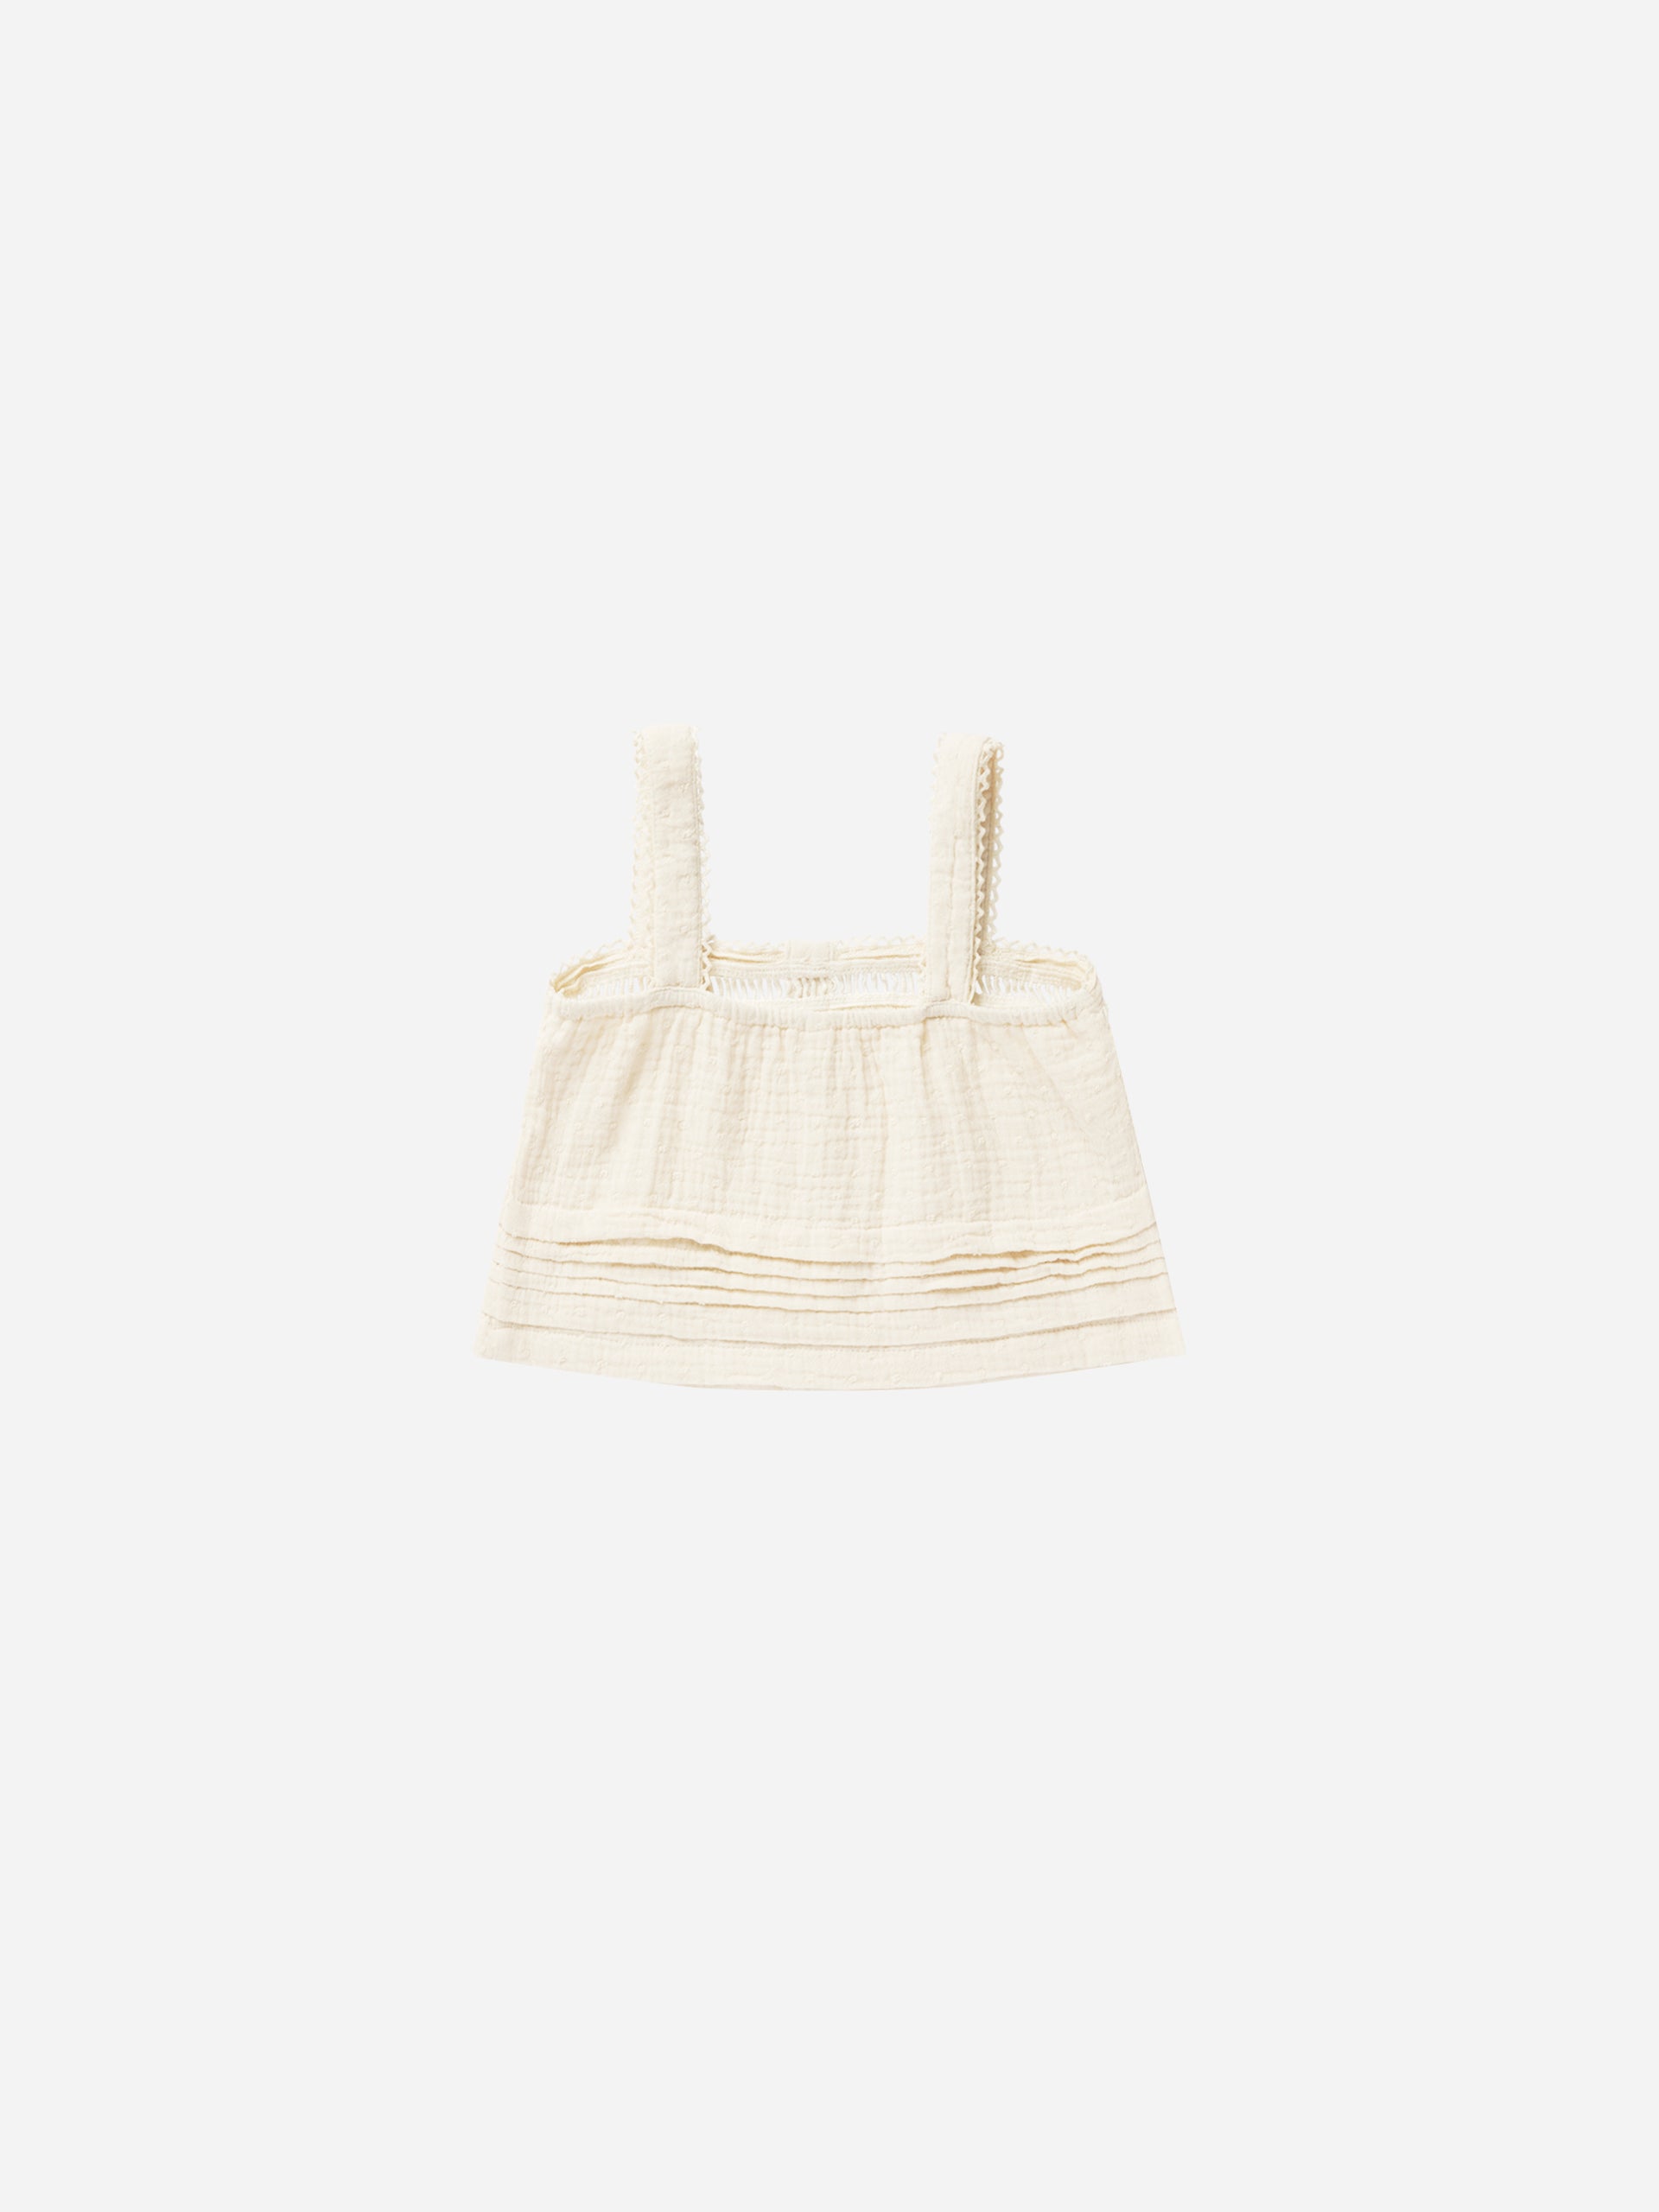 Pleat Tank || Ivory - Rylee + Cru | Kids Clothes | Trendy Baby Clothes | Modern Infant Outfits |